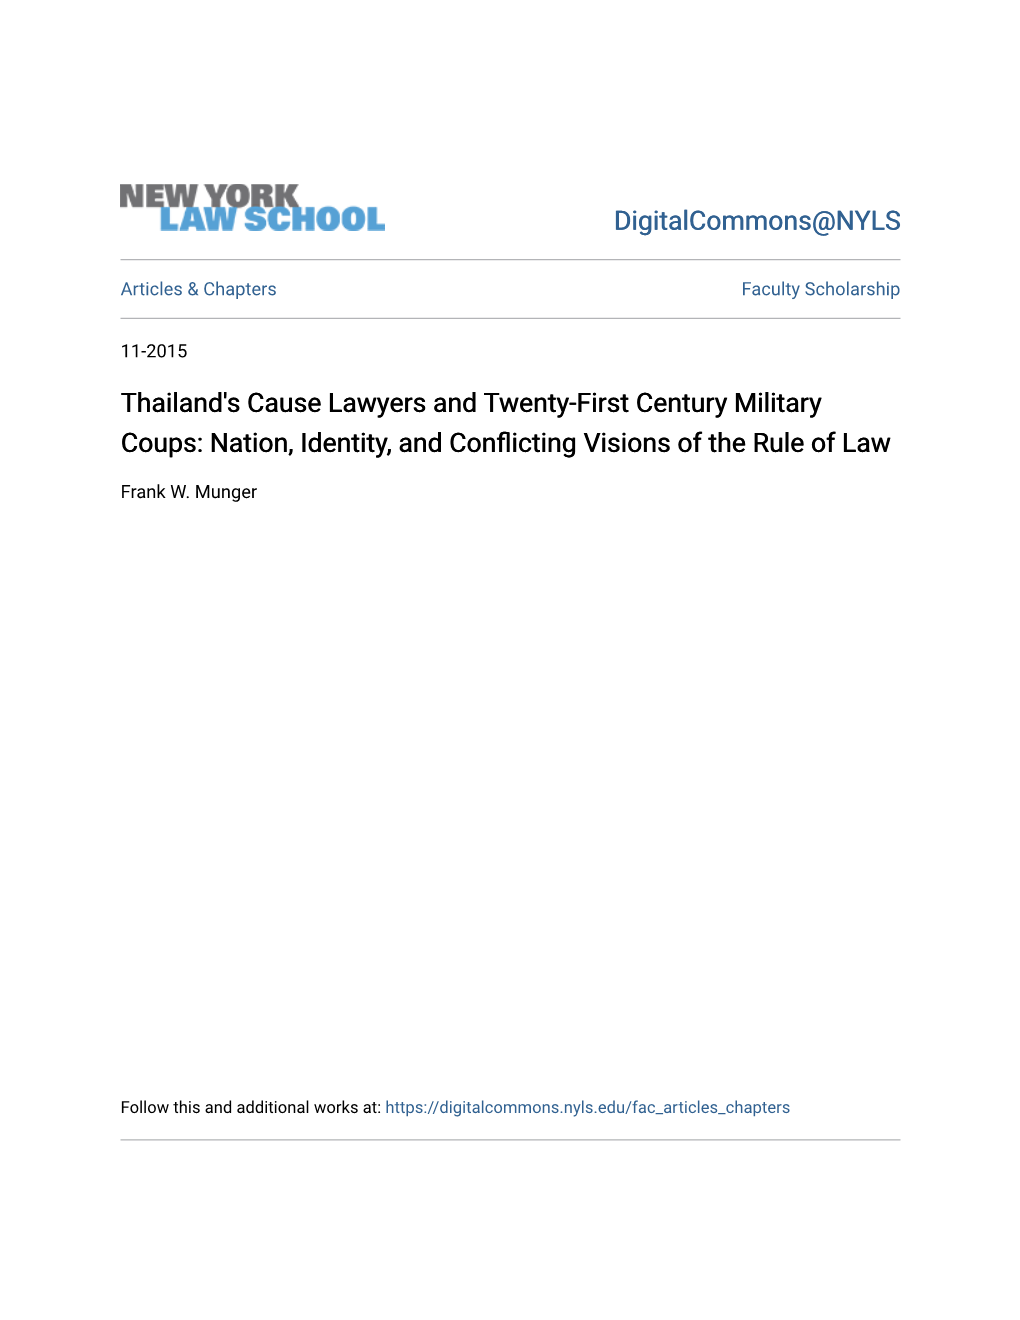 Thailand's Cause Lawyers and Twenty-First Century Military Coups: Nation, Identity, and Conflicting Visions of the Rule of Law